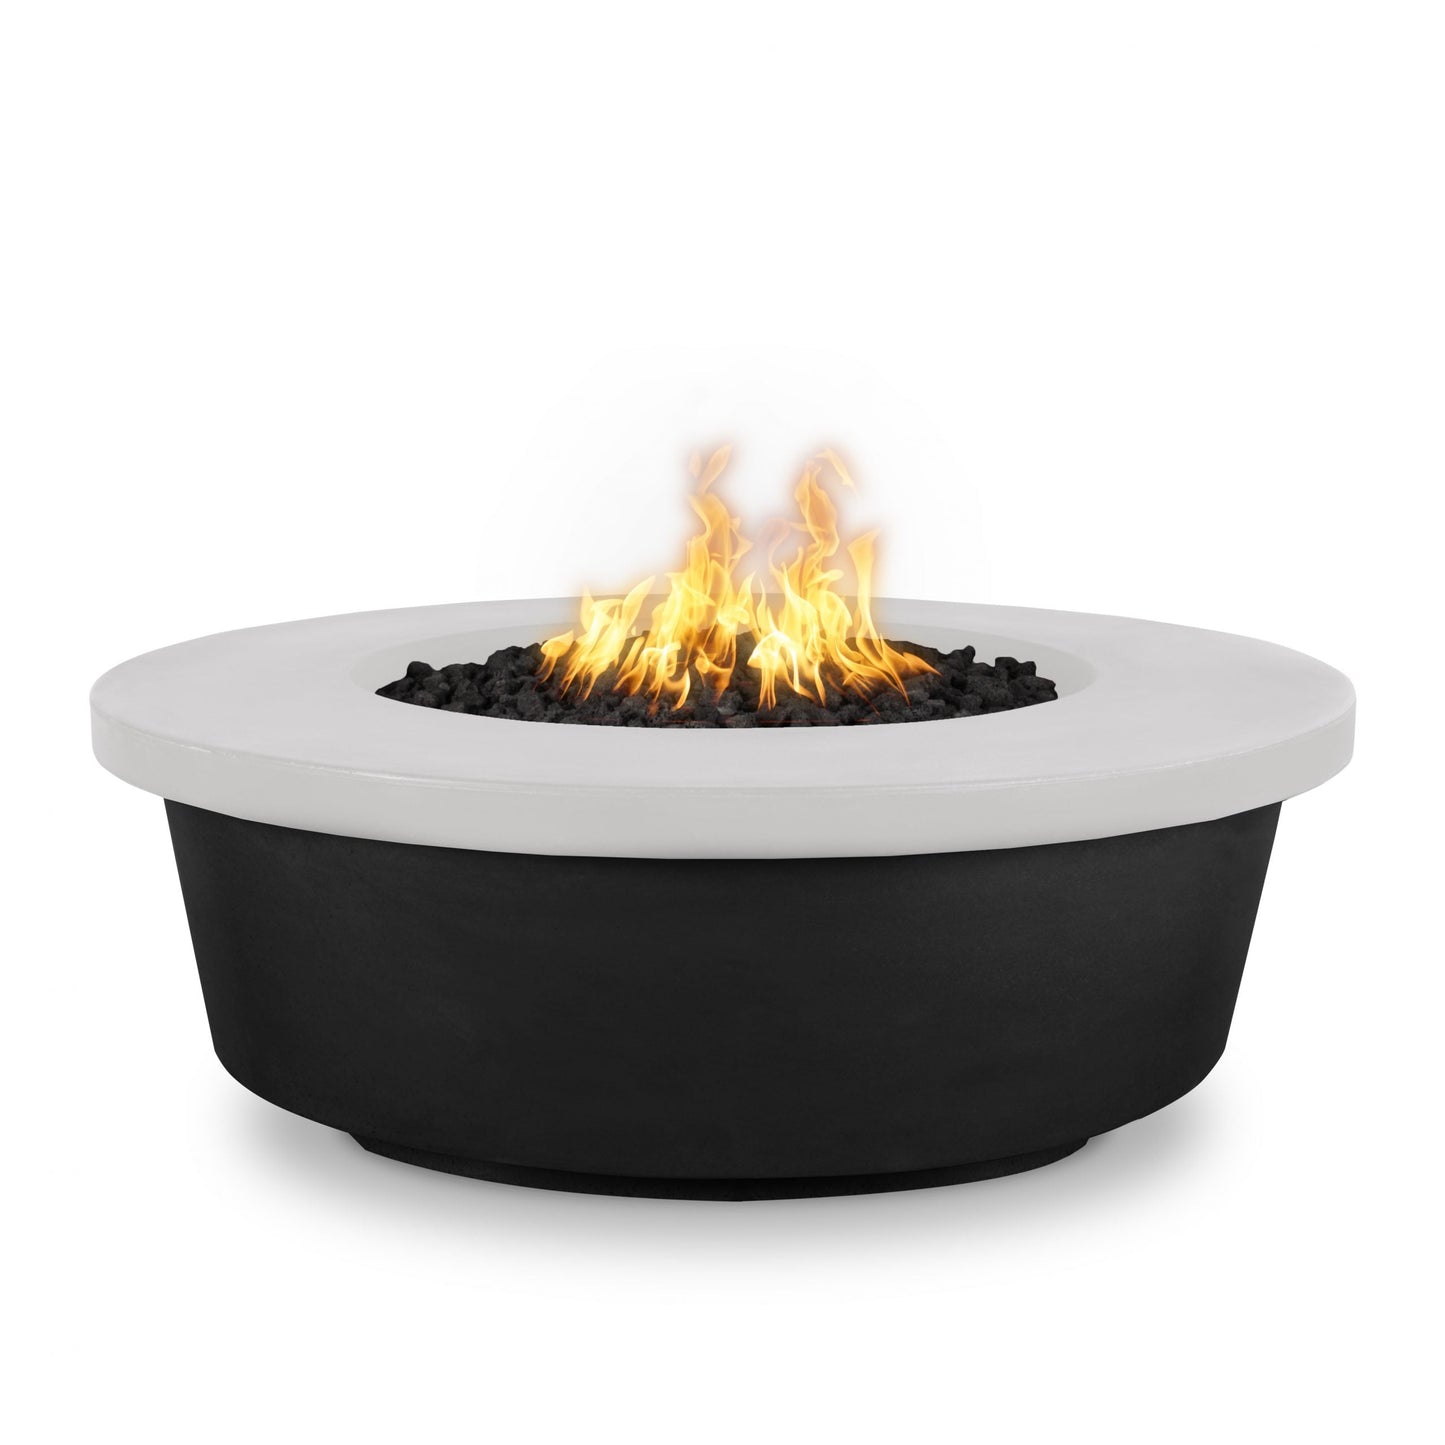 The Outdoor Plus Round Tempe 48" Black & White Powder Coated Natural Gas Fire Pit with 110V Electronic Ignition